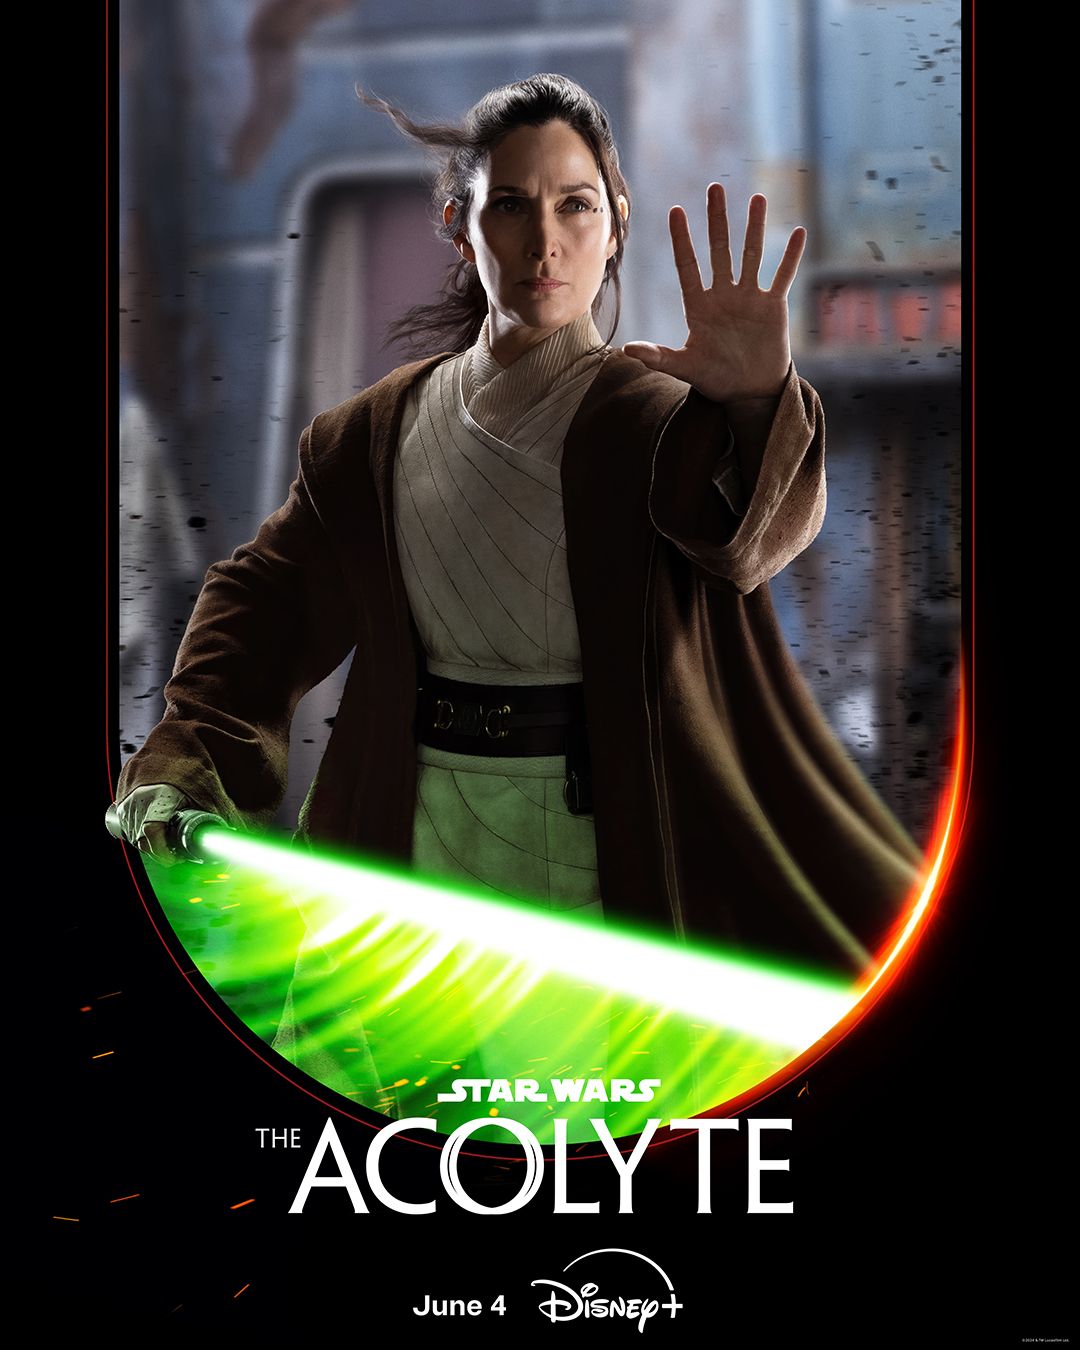 Carrie Ann Moss as Indara Holding a Green Lightsaber in Star Wars The Acolyte Poster